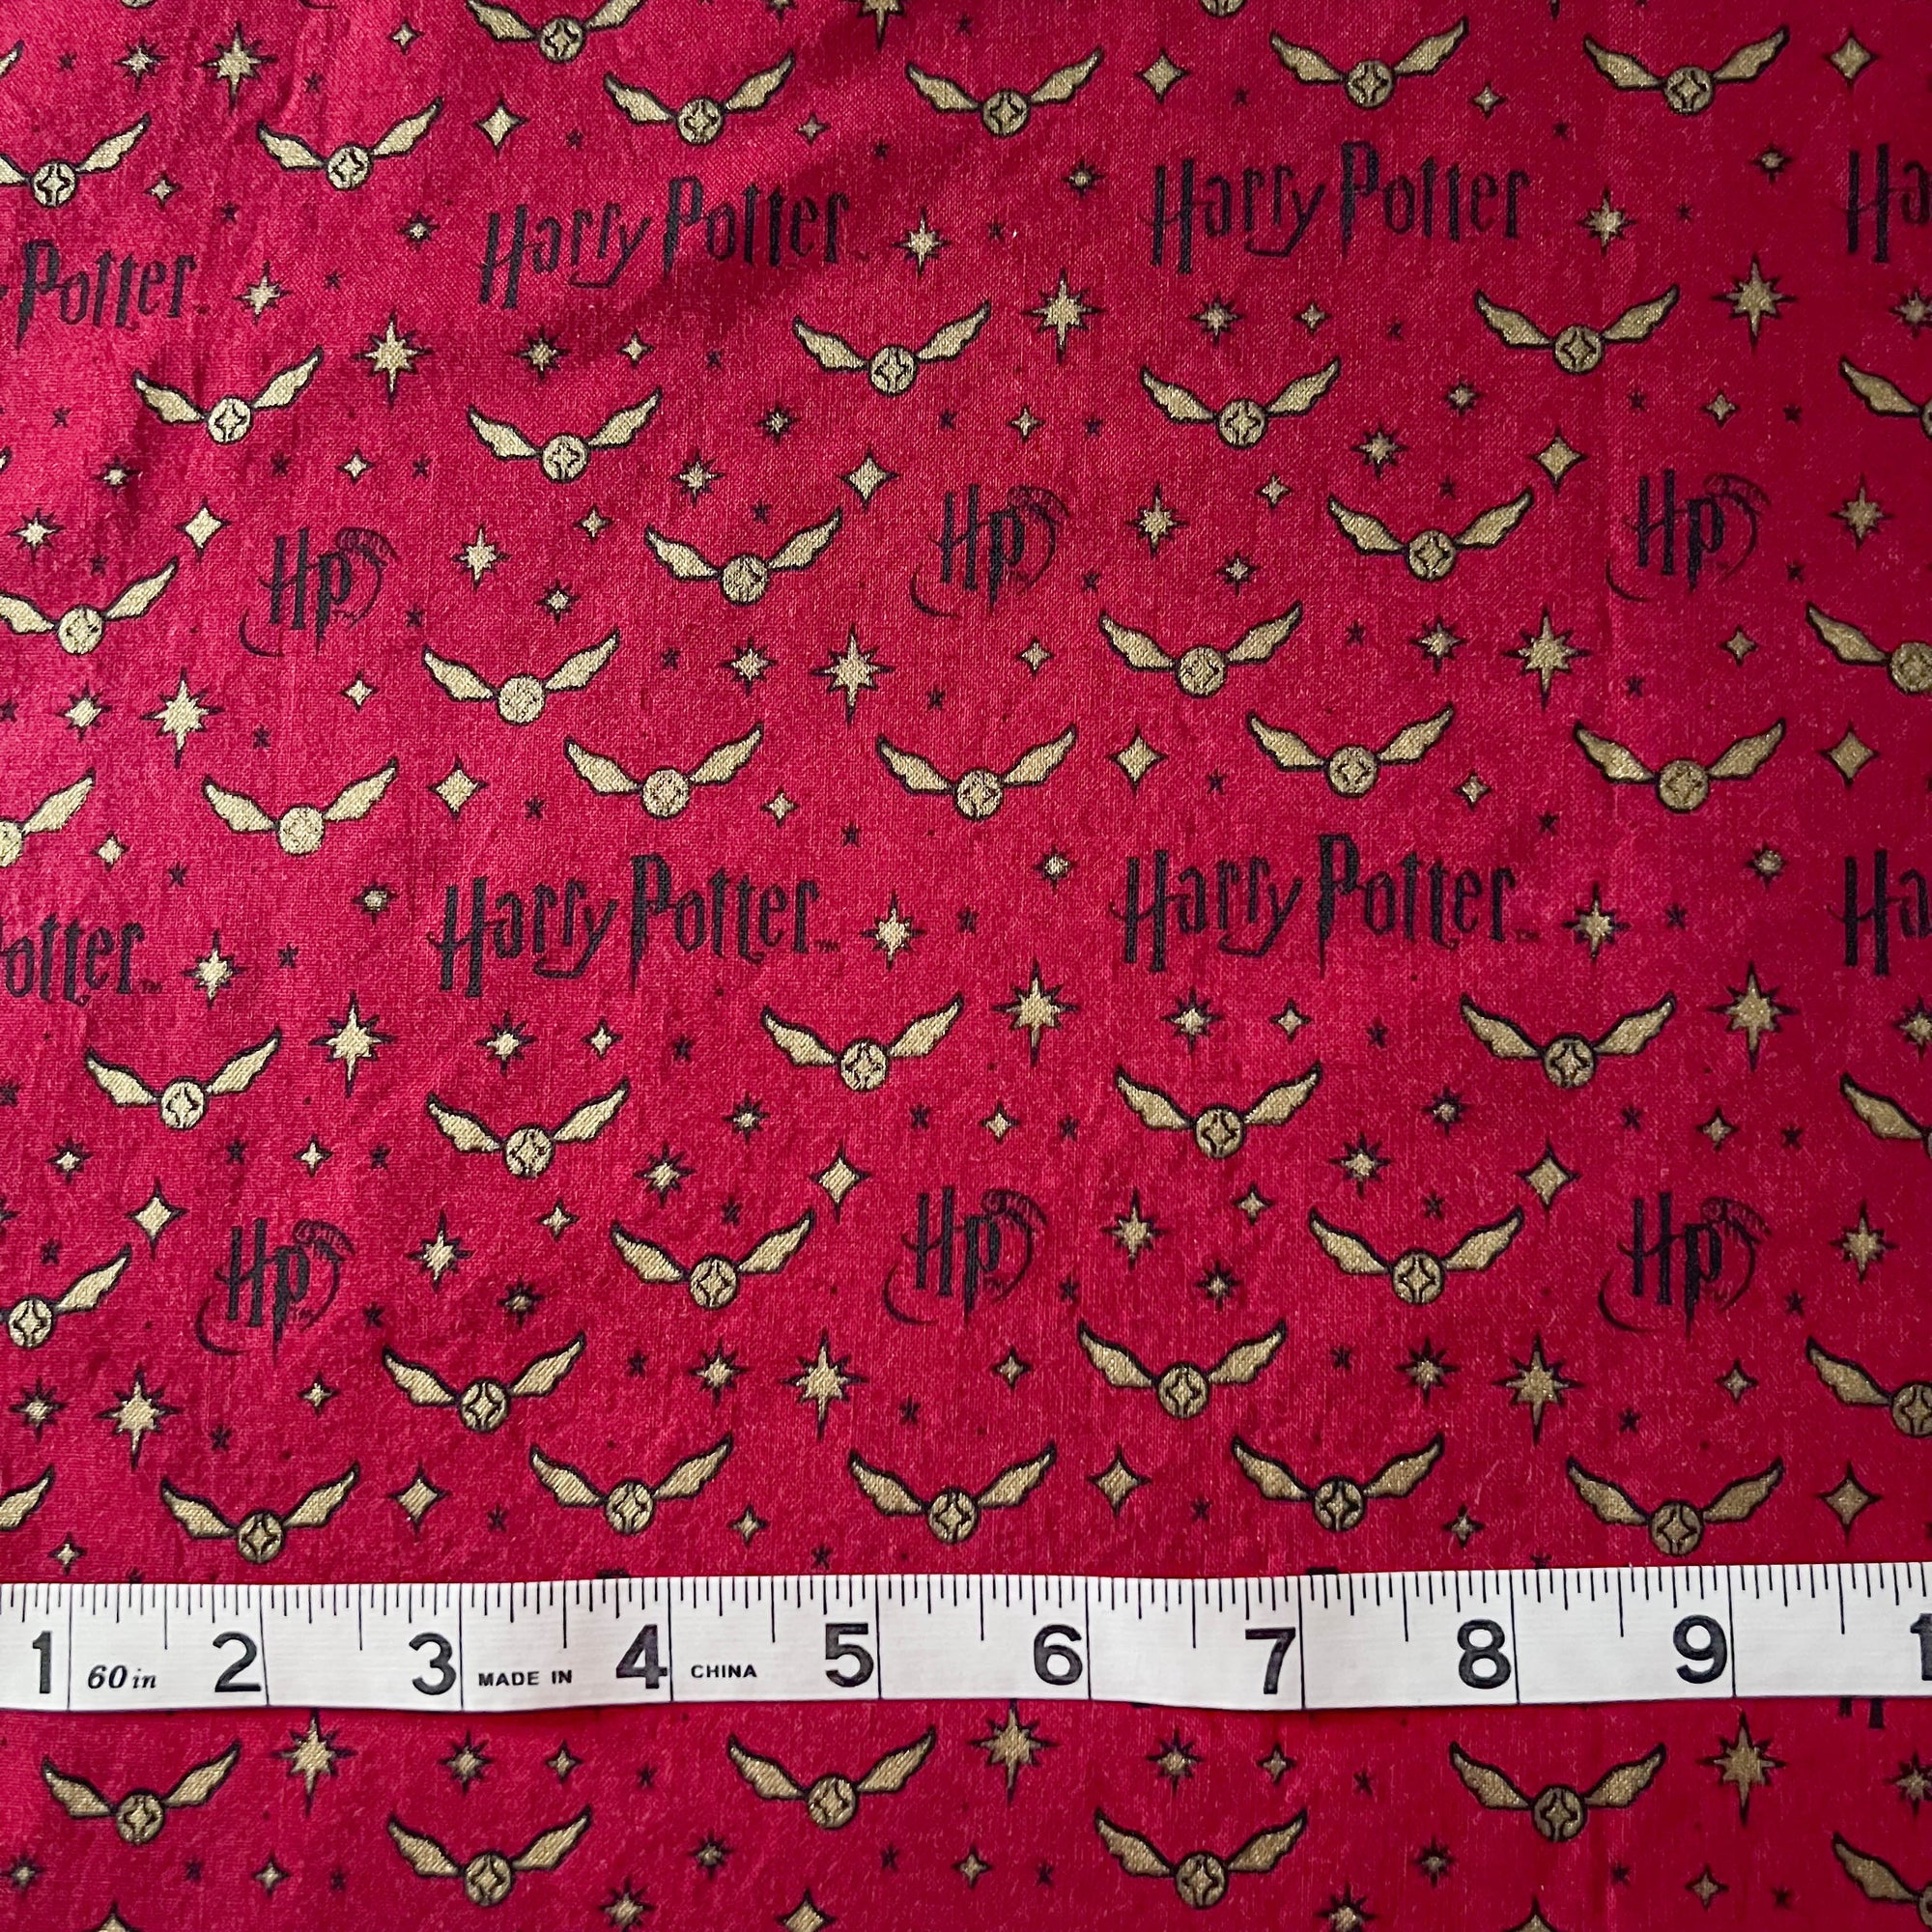 Harry Potter - Crimson and Gold Snitch Fabric - Out of Print - 1 Yard